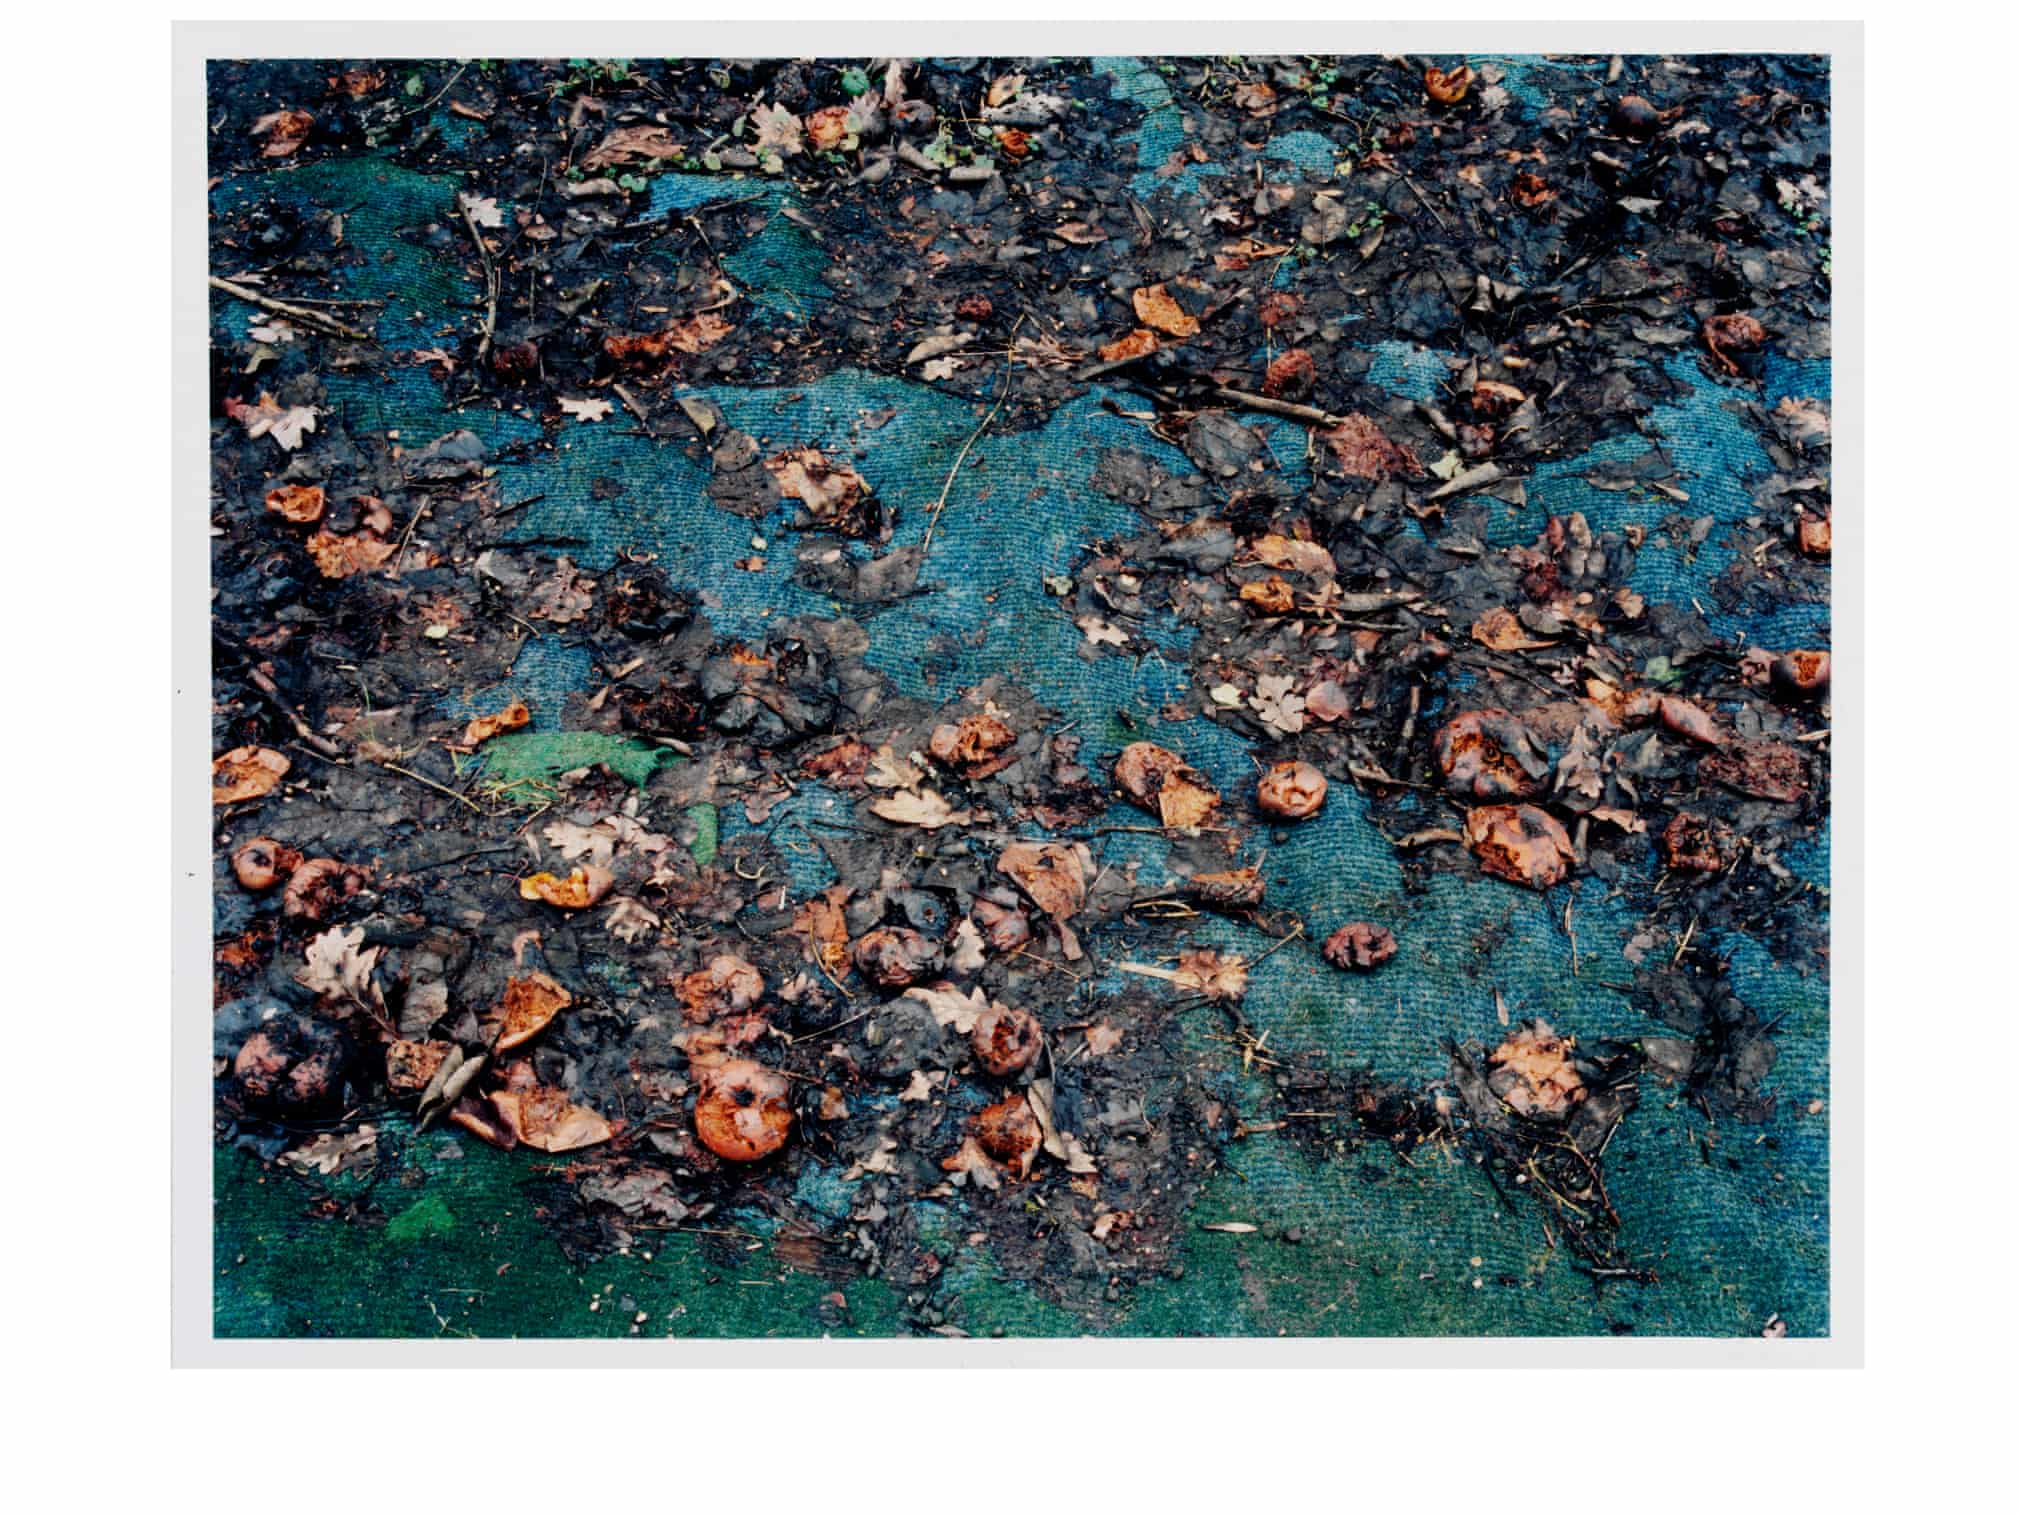 Fotó: Mark Edwards: Rotting Apples from the series What Has Been Gathered Will Disperse, 2004 © Mark Edwards.